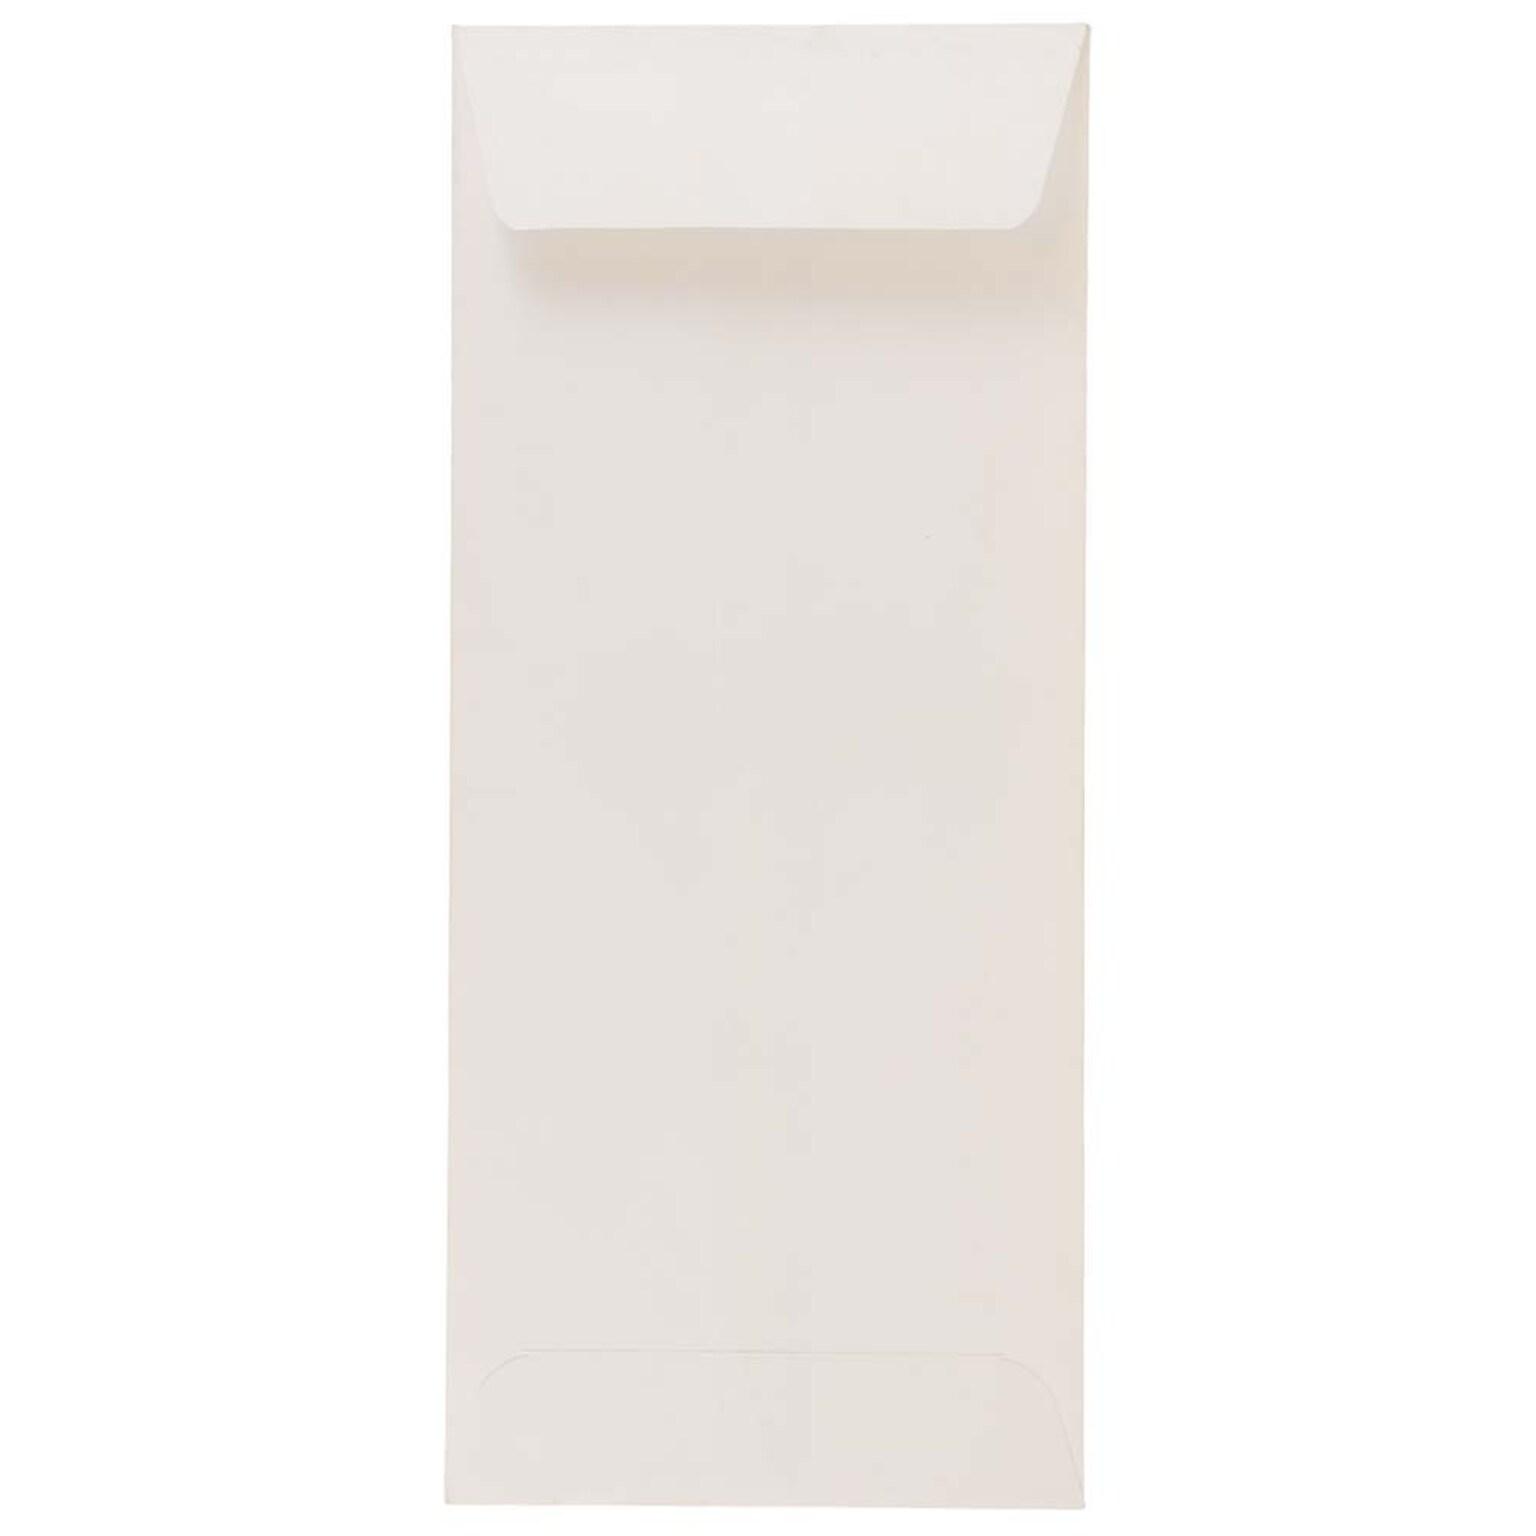 JAM Paper Open End #10 Currency Envelope, 4 1/8 x 9 1/2, White, 500/Pack (49856H)